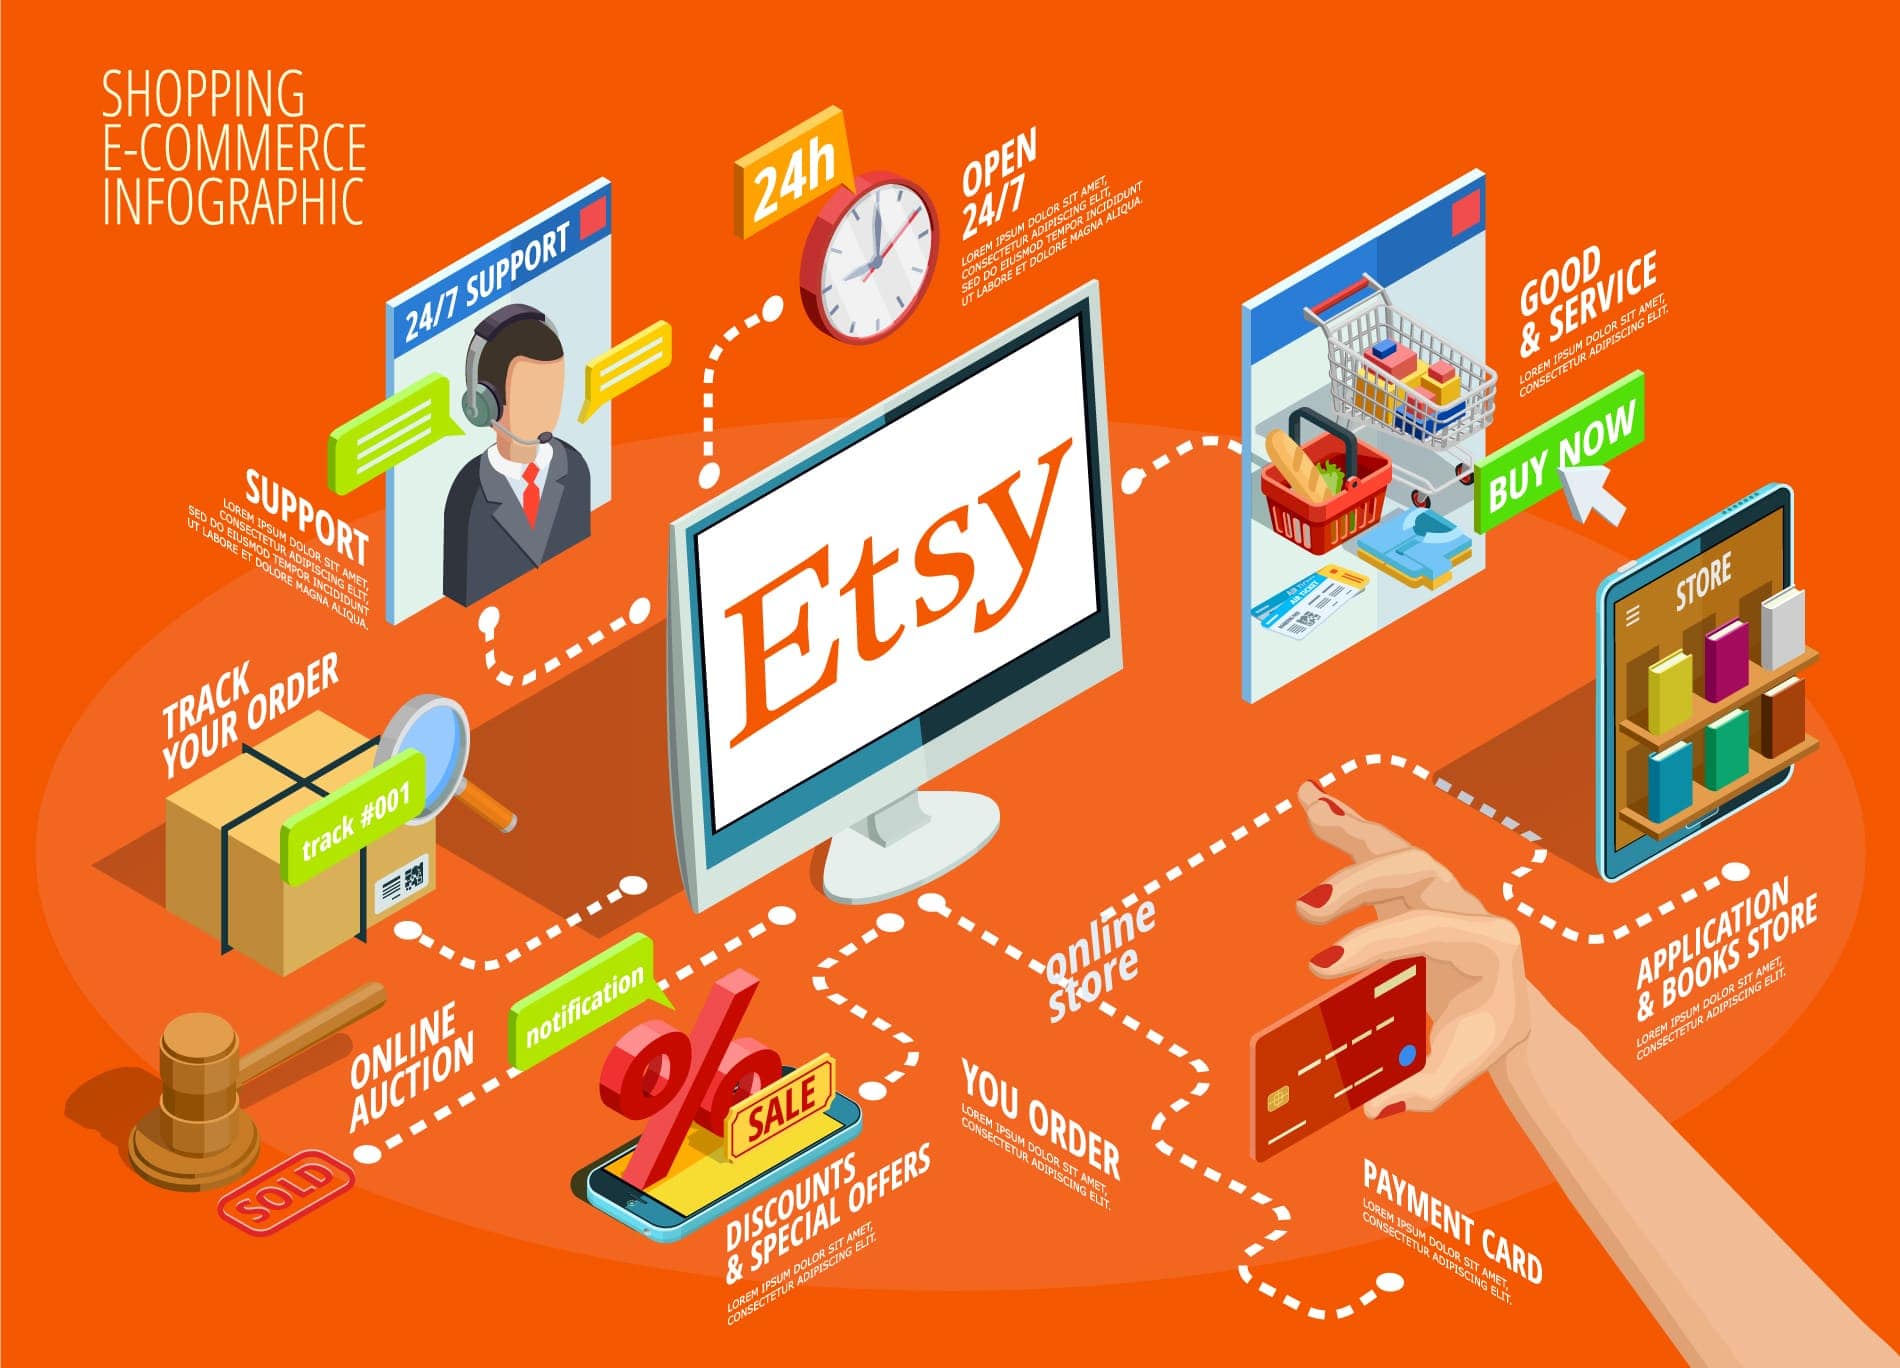 Etsy is an online marketplace